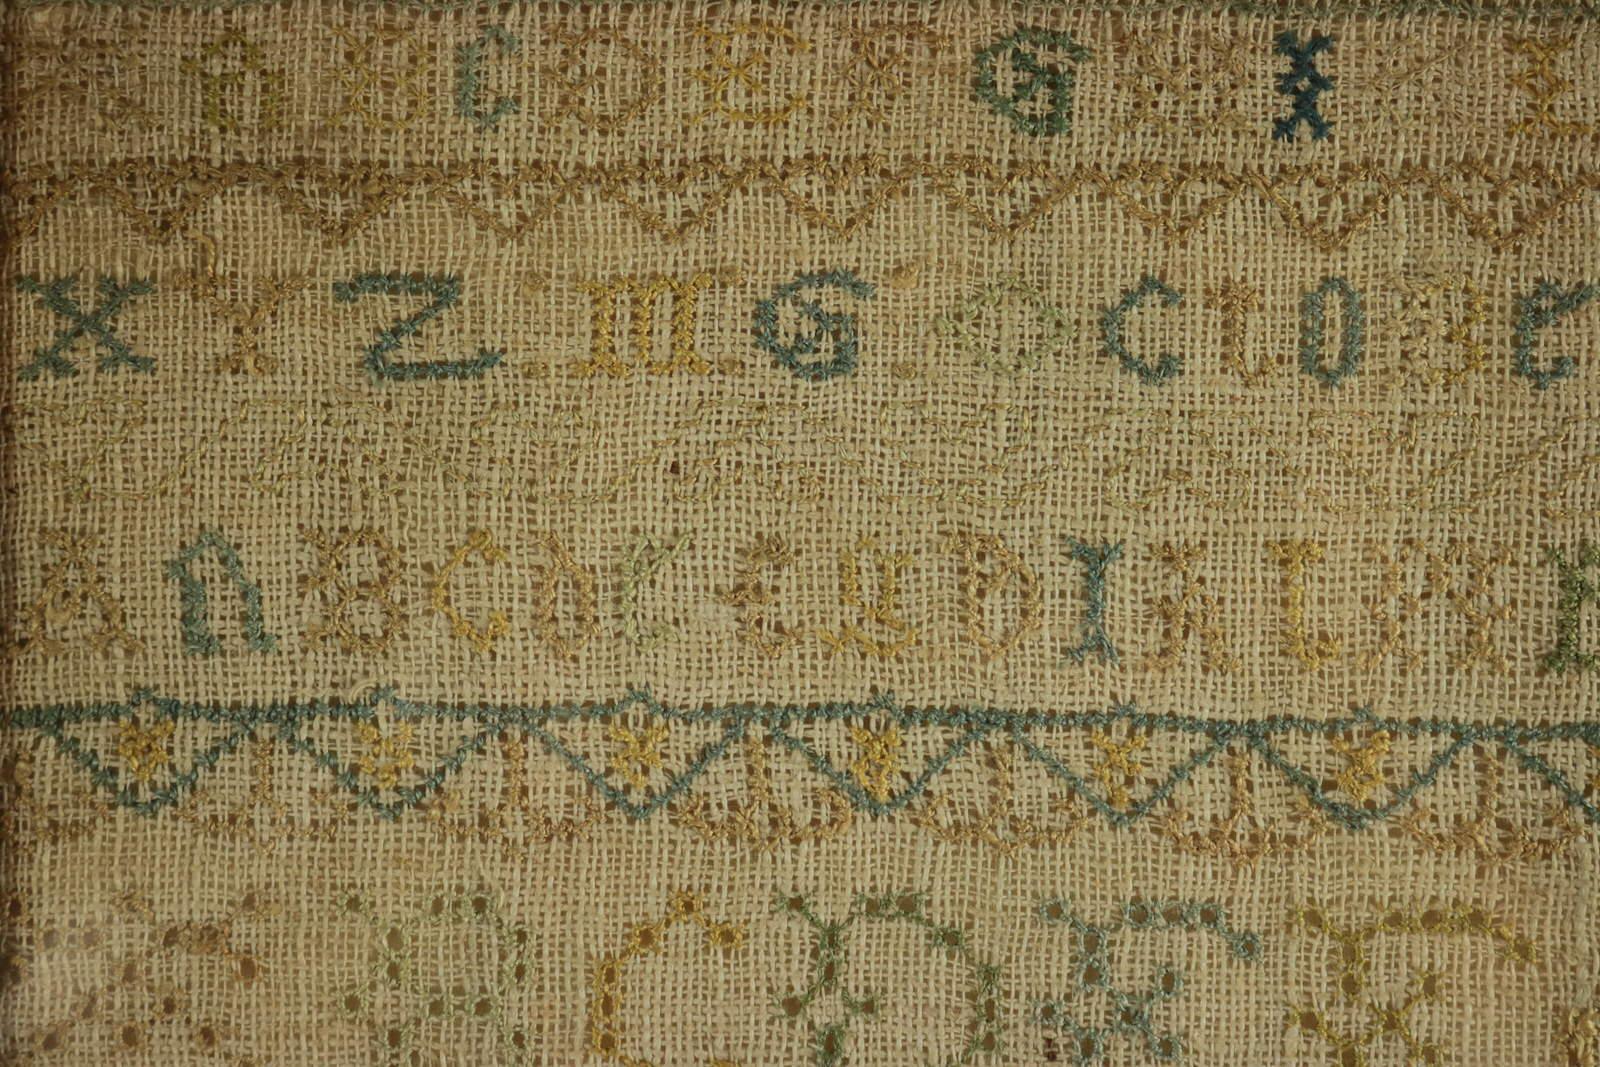 Large Antique Band Sampler, c.1725, by Mary Gatehouse For Sale 4